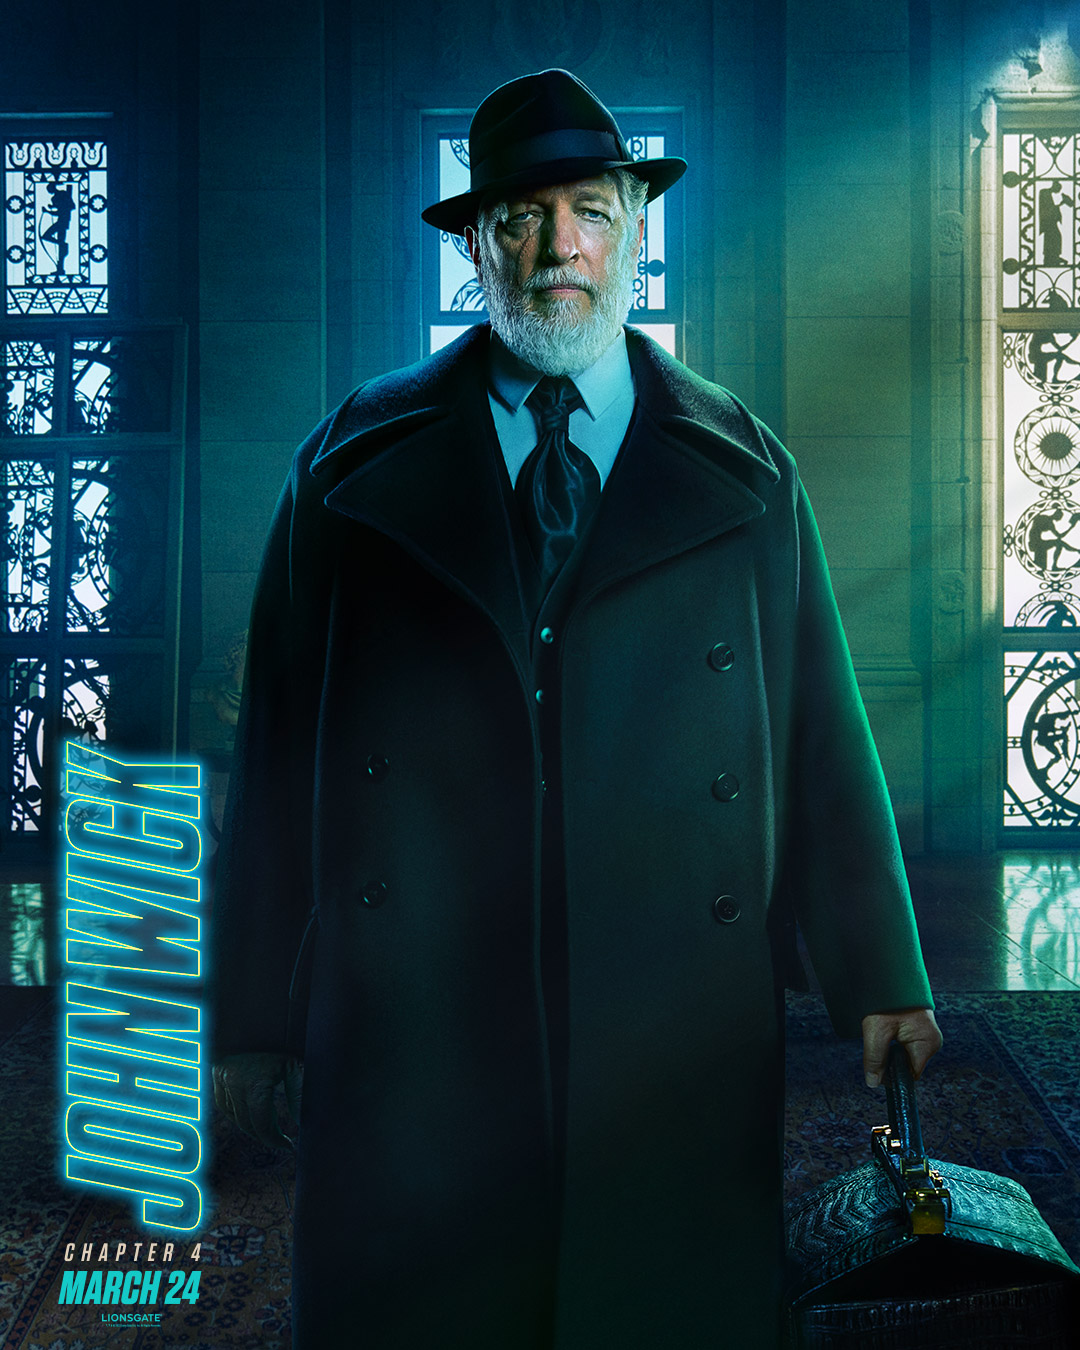 John Wick: Chapter 4 존윅4
The Harbinger
클랜시 브라운 Clancy Brown